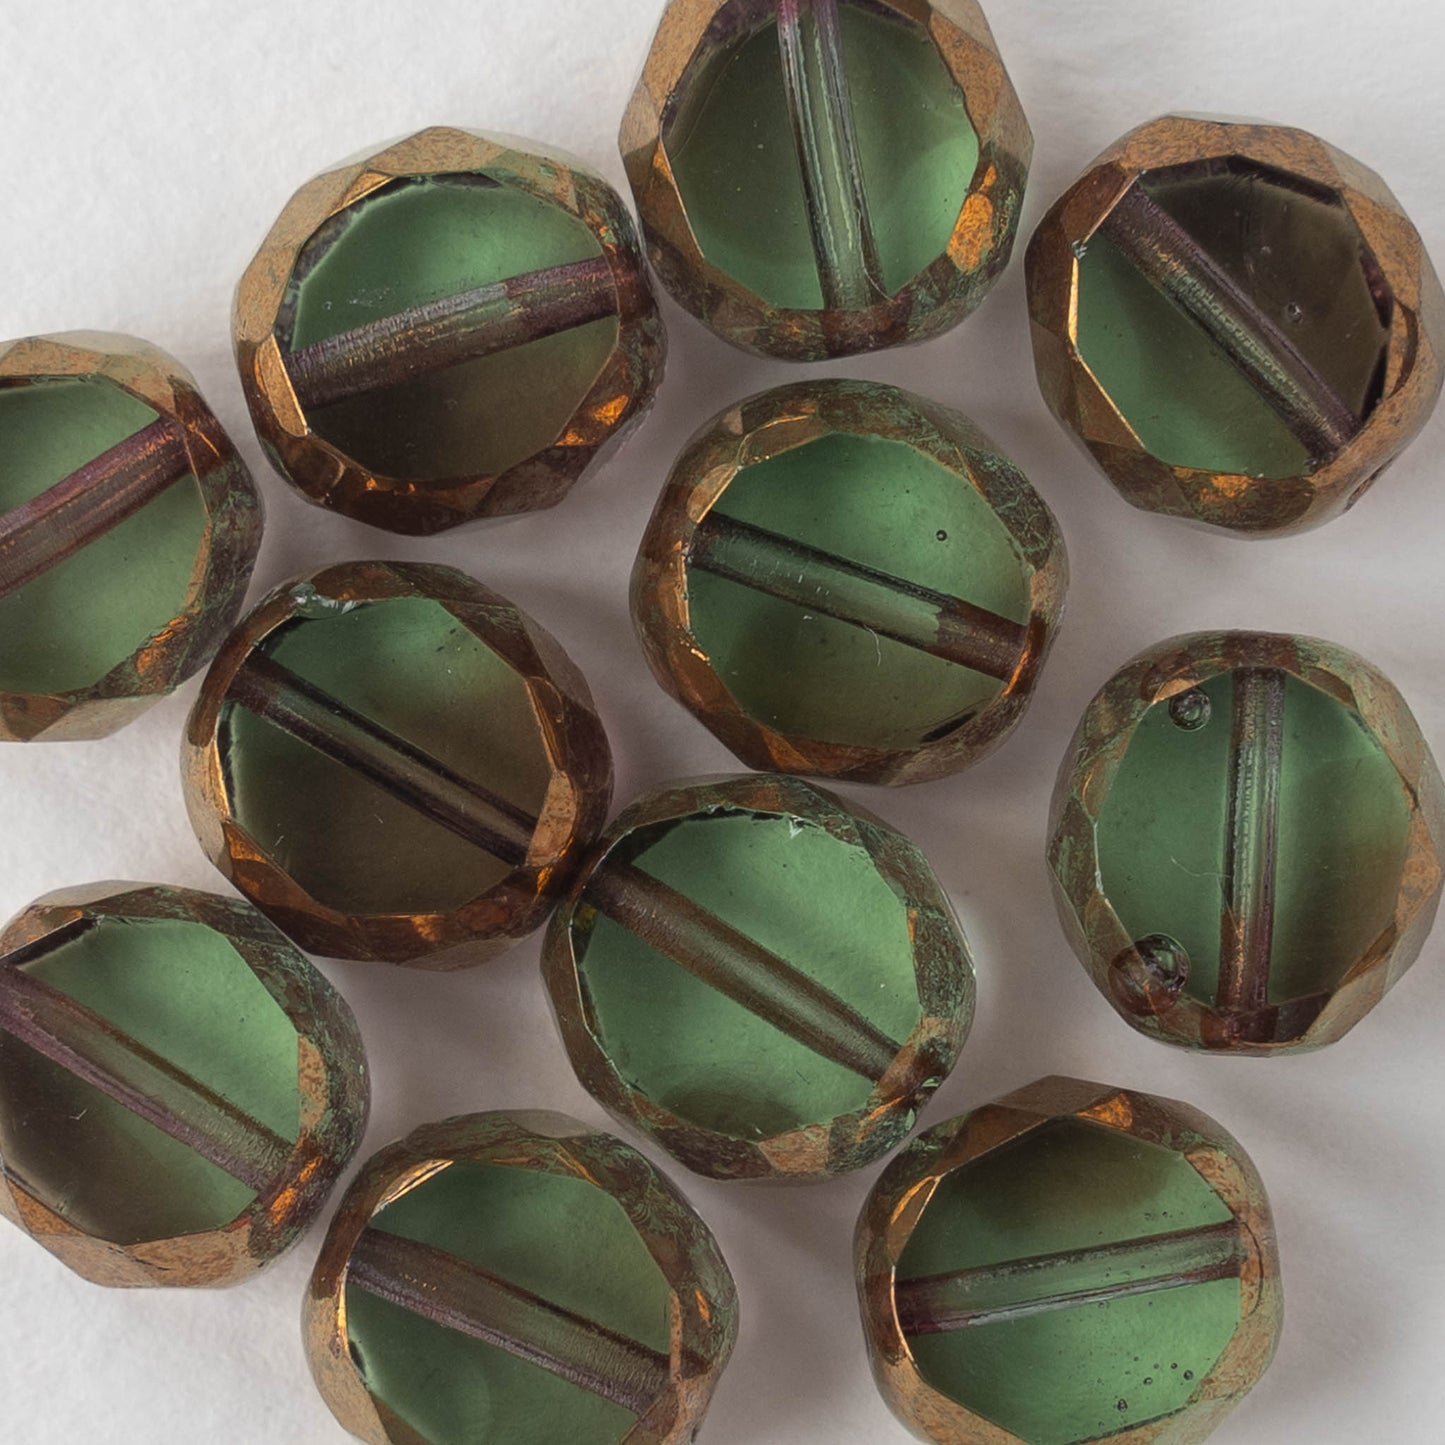 Chunky Faceted Round Coin Beads  - Peridot with Bronze - 6 beads